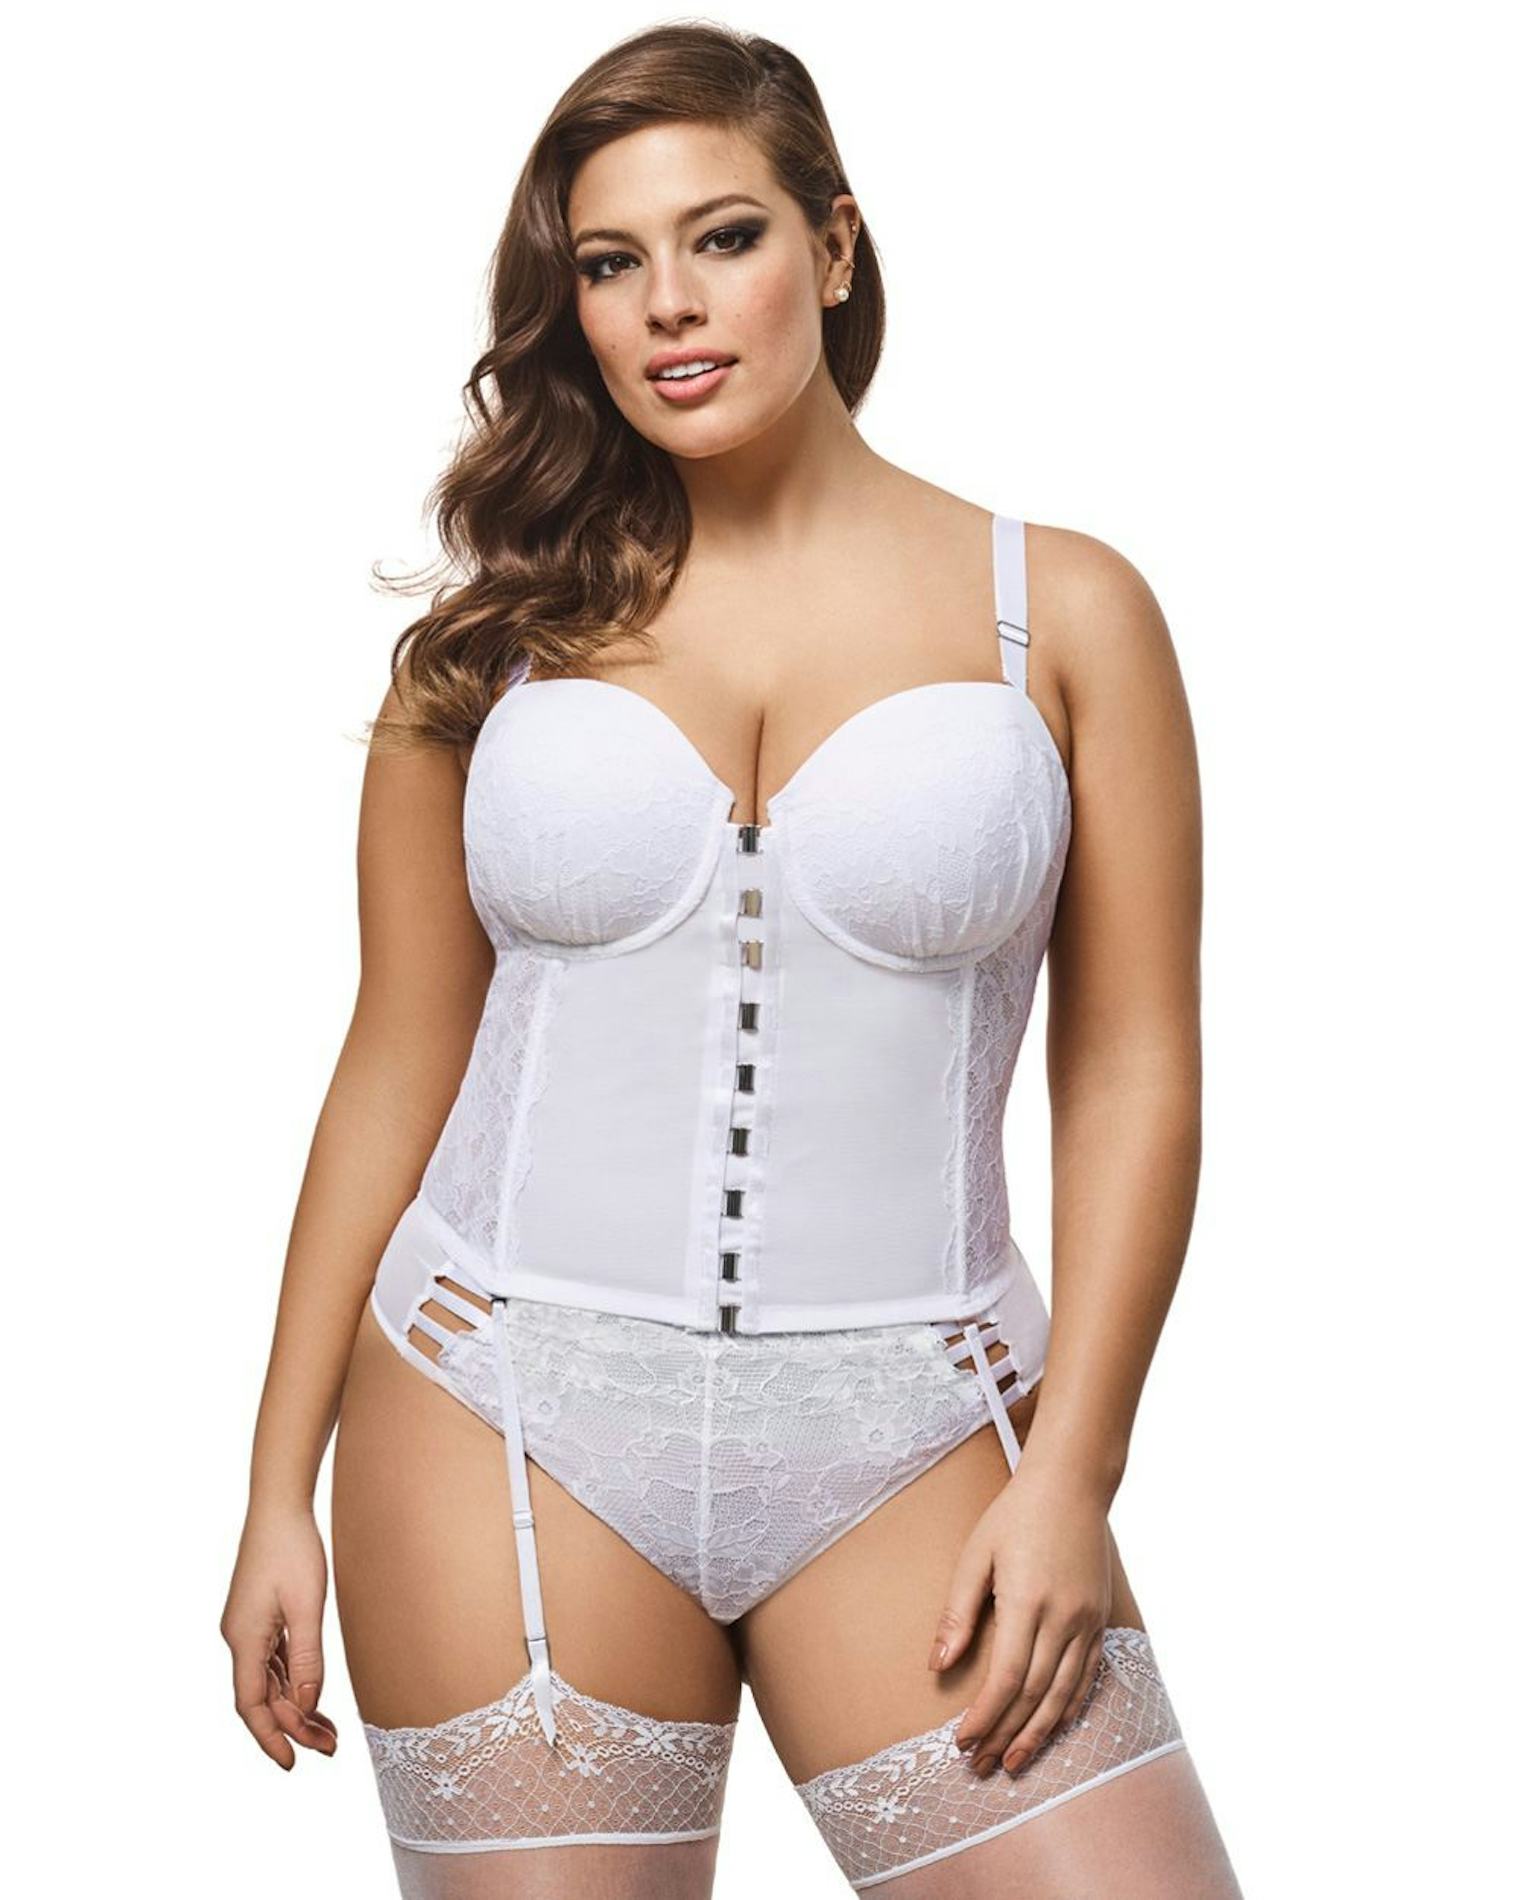 13 Stunning Plus Size Bridal Lingerie Designs For Your Special Day And Beyond — Photos 